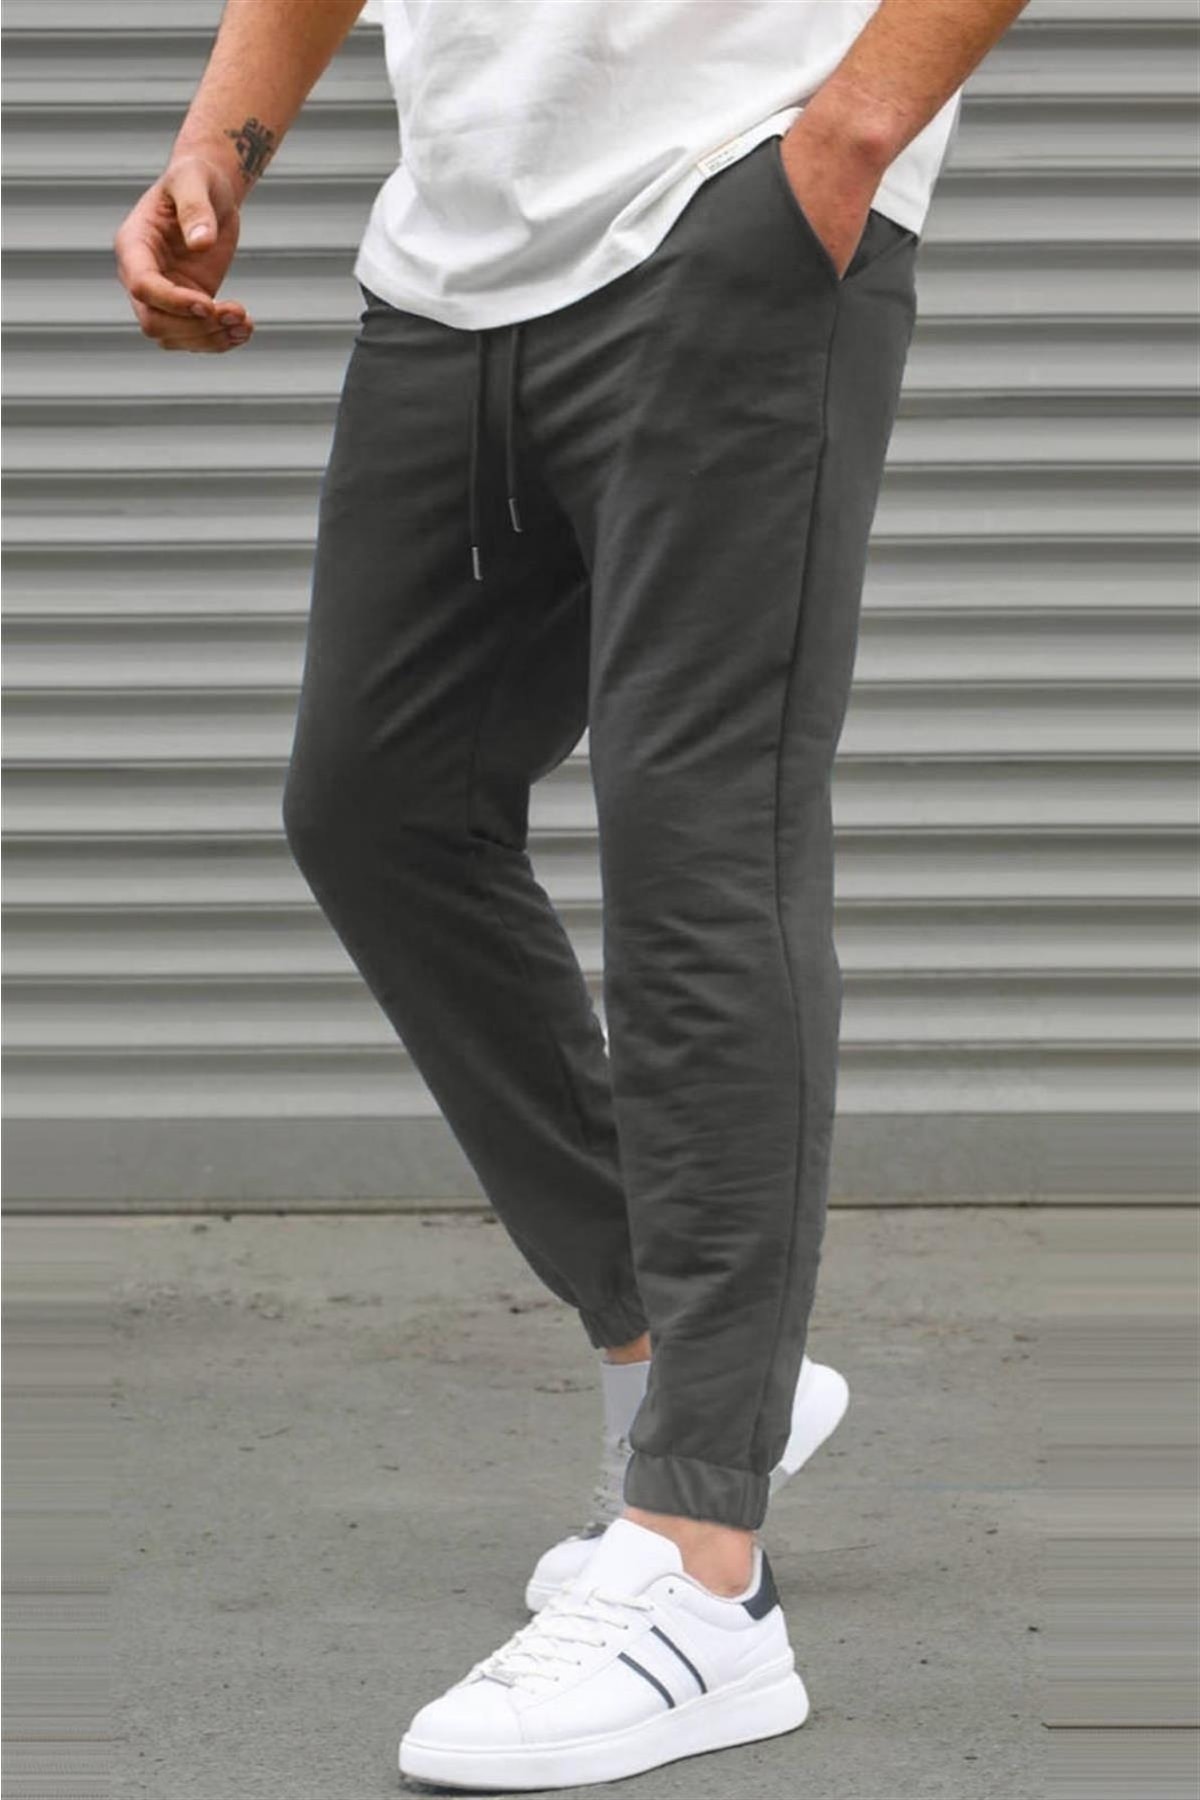 Madmext Smoked Basic Men's Tracksuits with Elastic Legs 5494